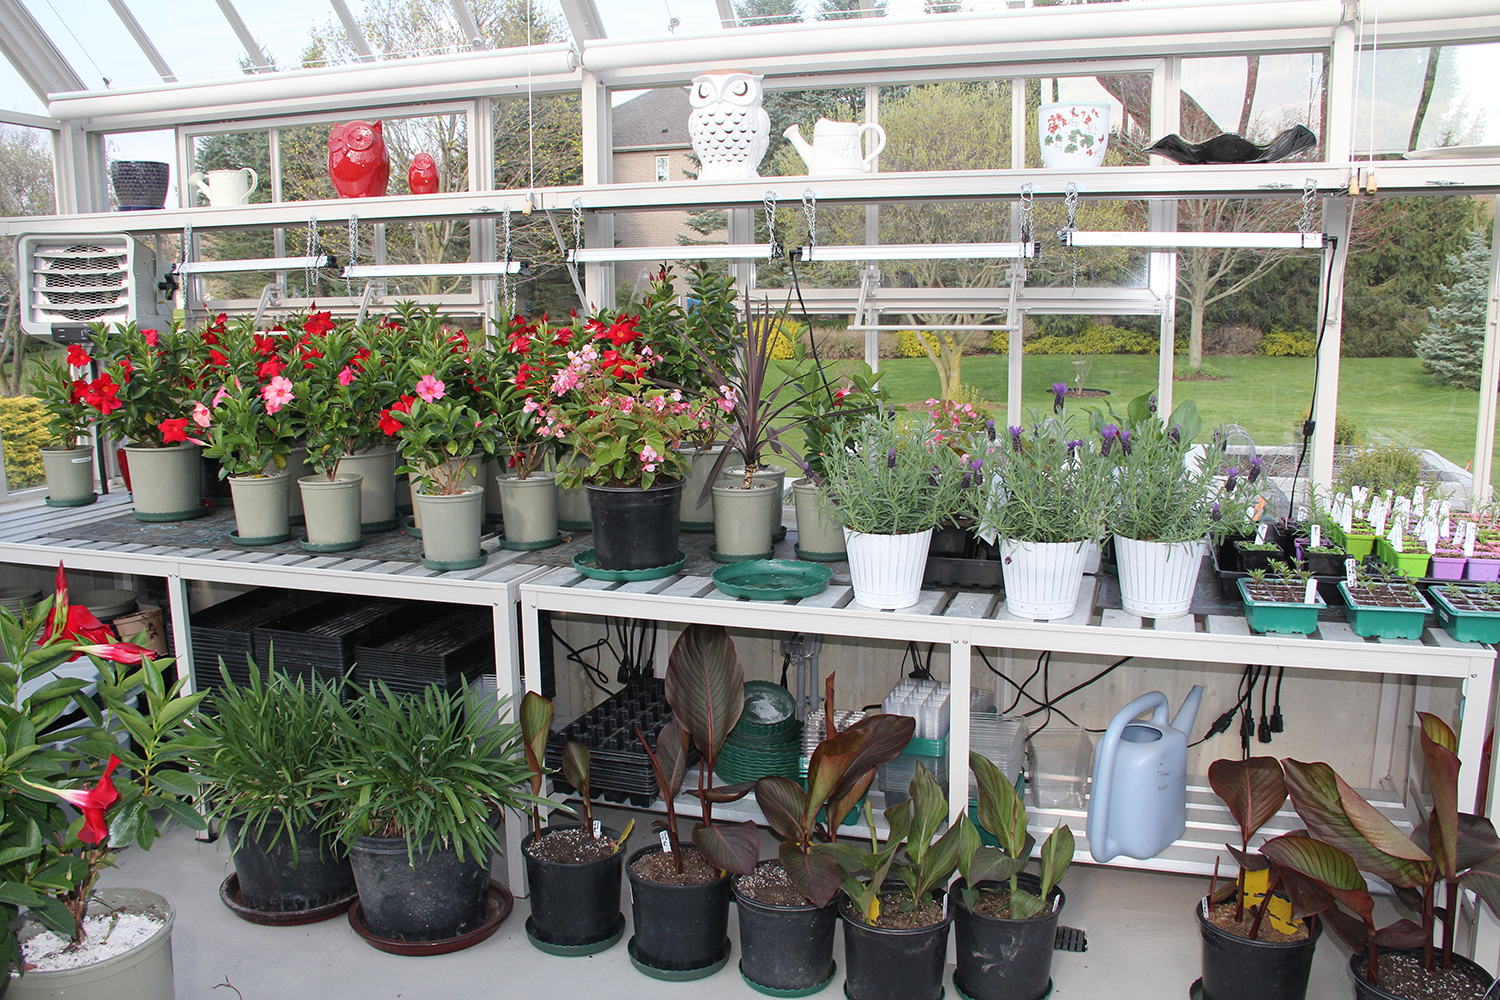 Greenhouse plants in late April